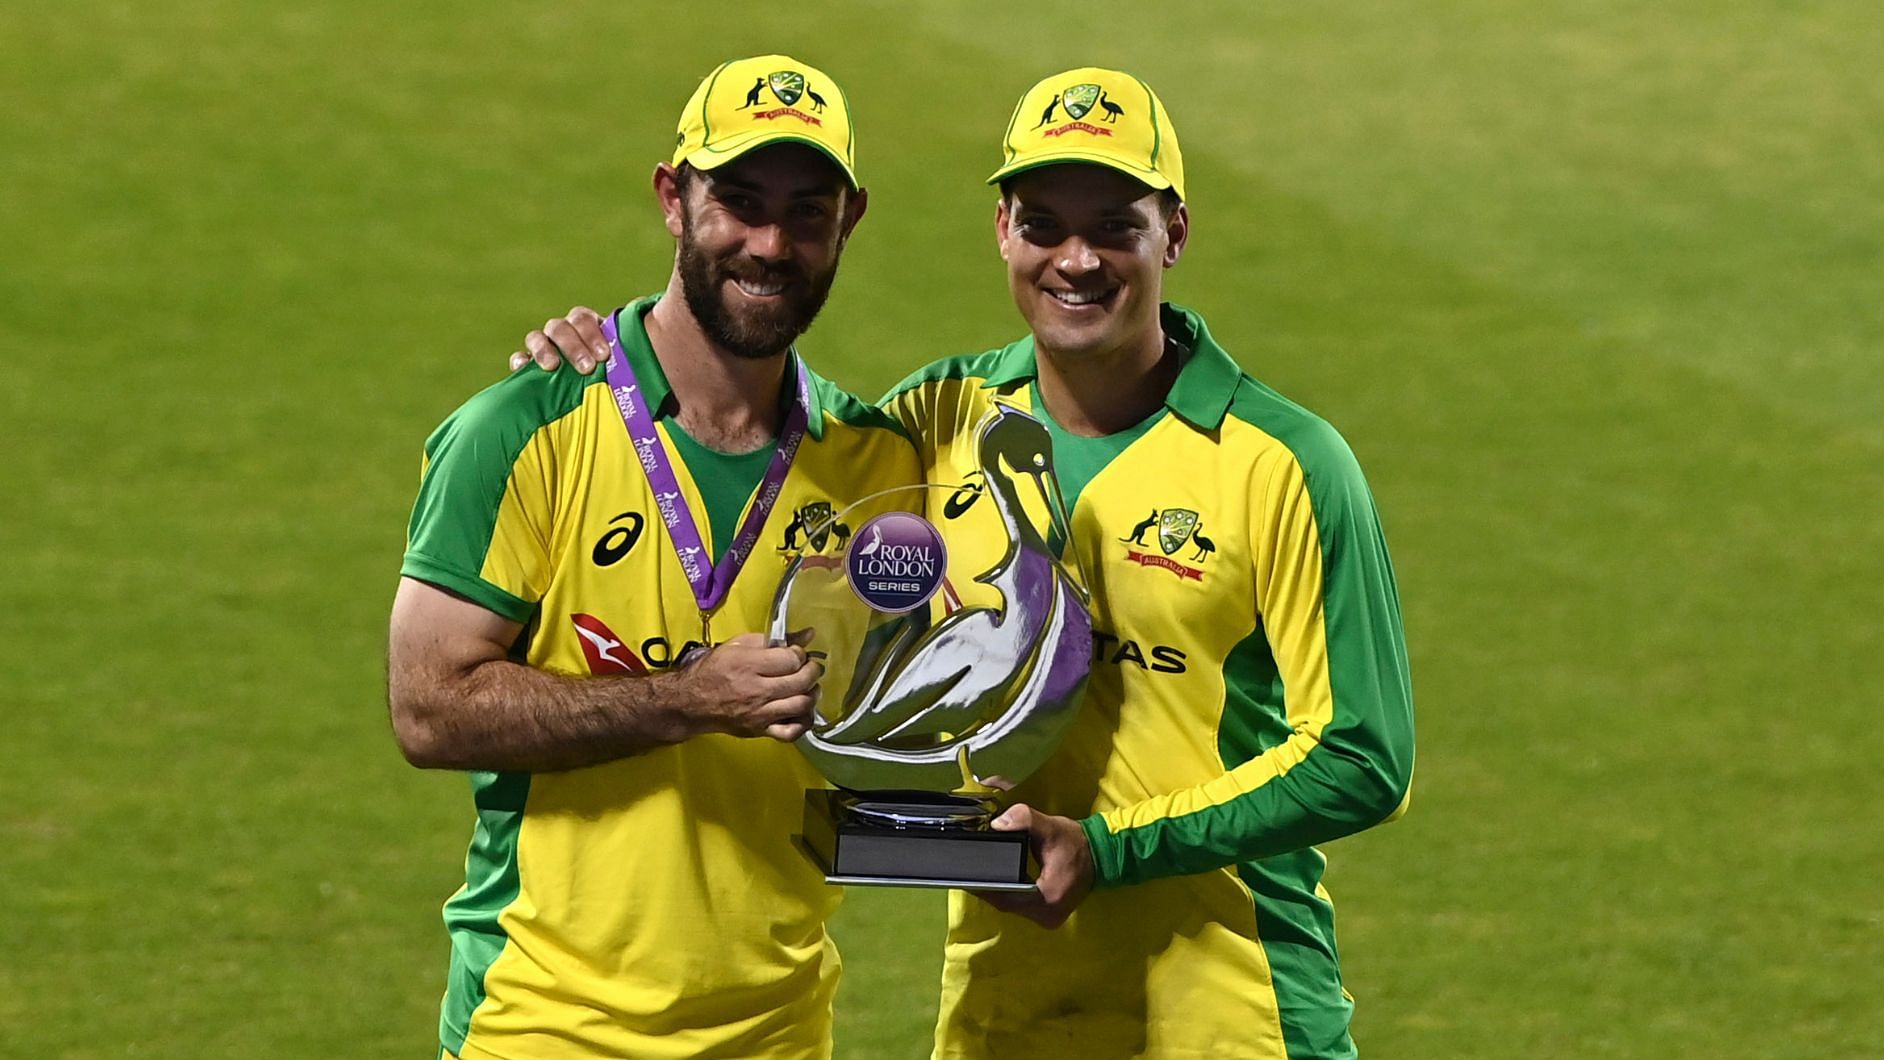 Glenn Maxwell and Alex Carey scored centuries to help Australia pull off a great turnaround victory and win the ODI series against England.